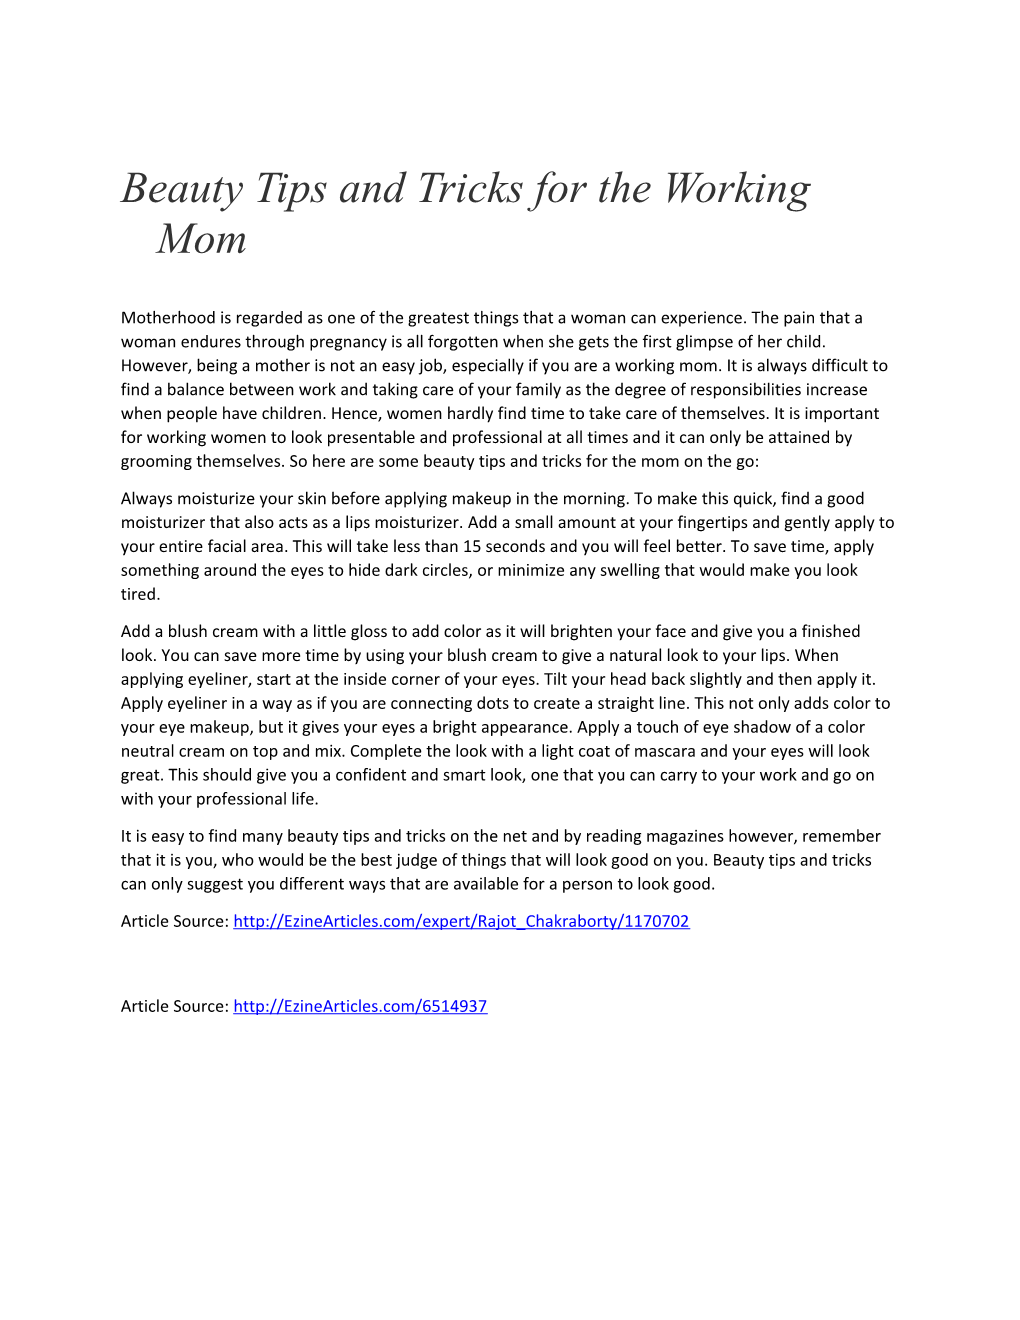 Beauty Tips and Tricks for the Working Mom